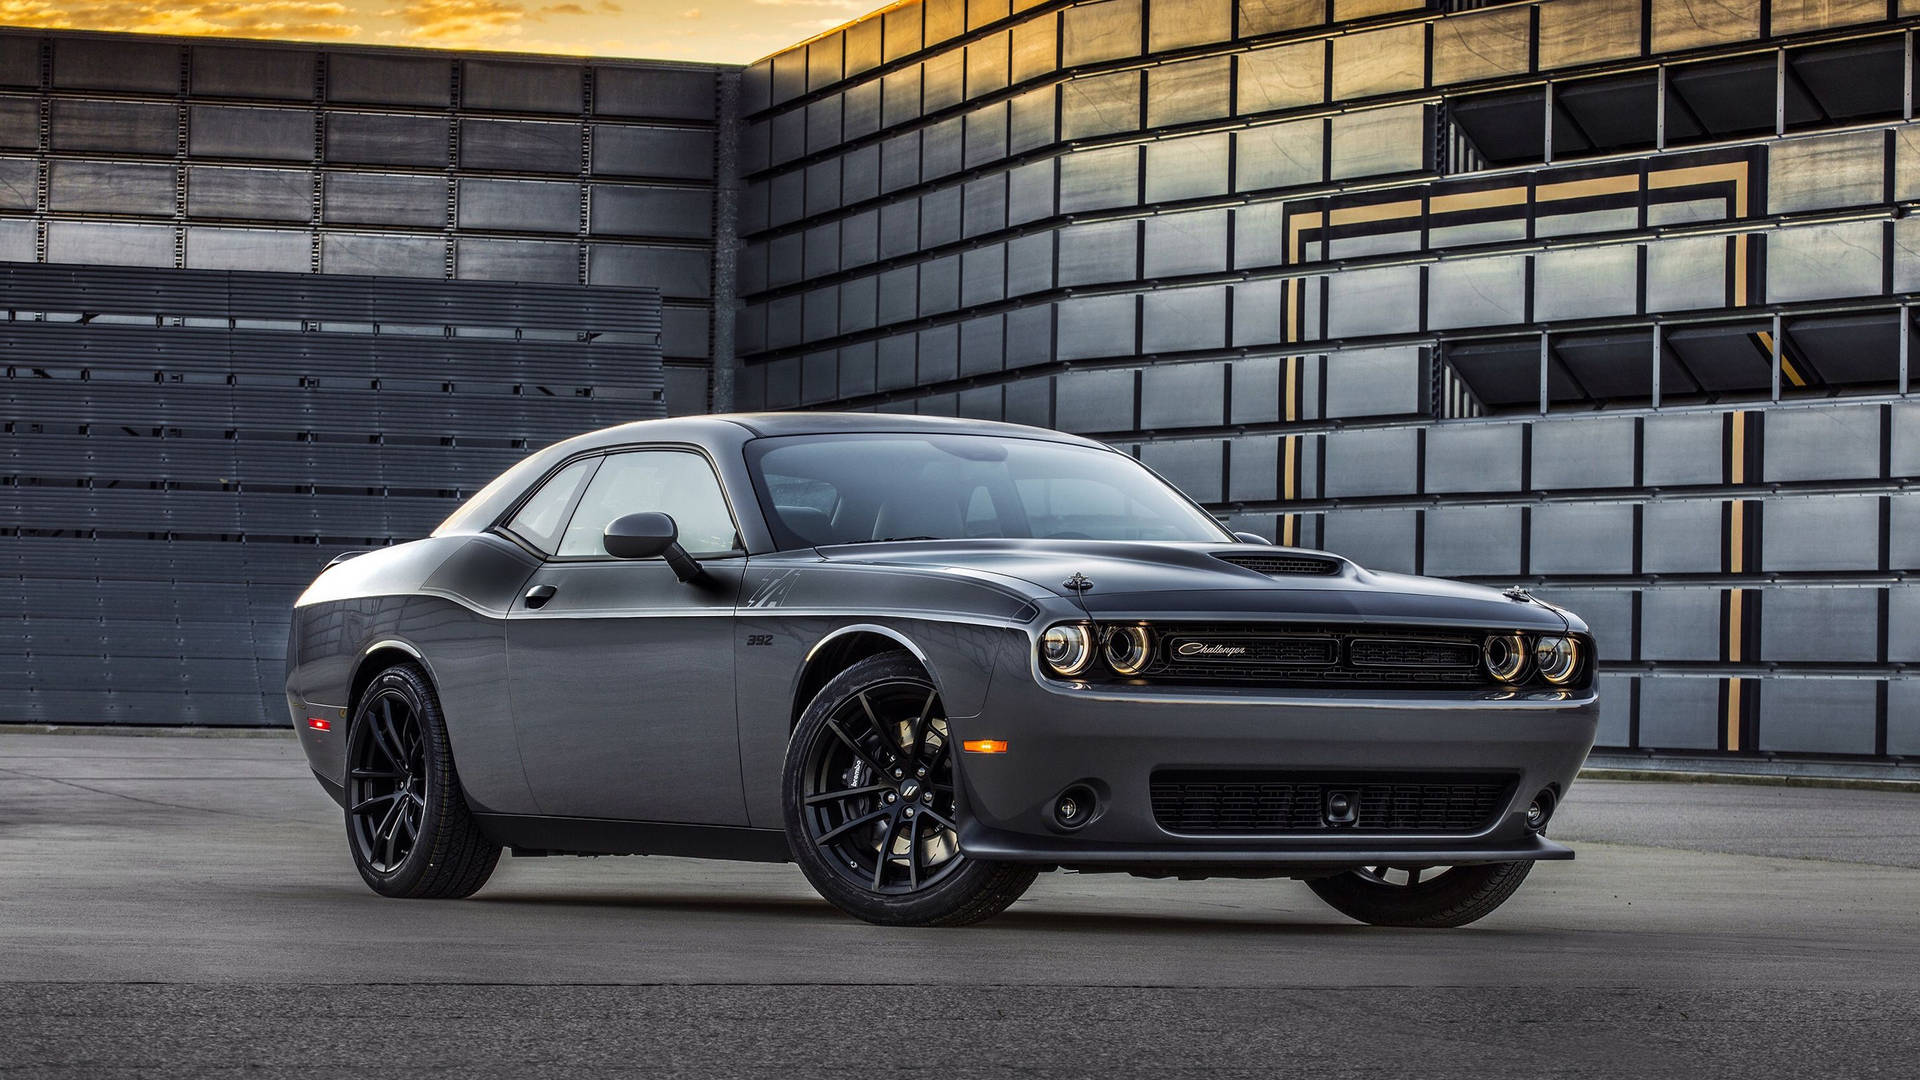 Dodge Challenger With Wide Body Design